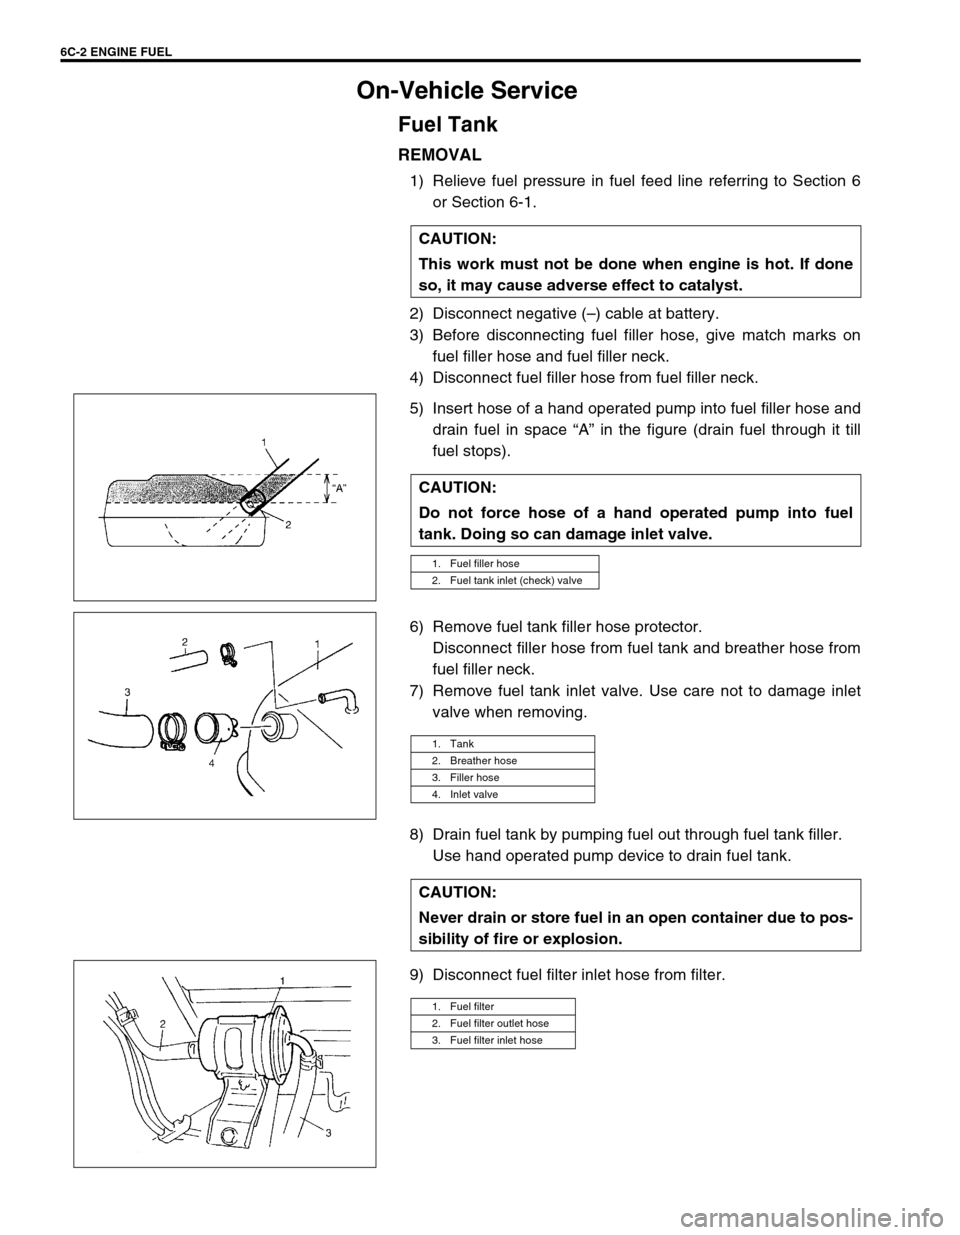 SUZUKI GRAND VITARA 1999 2.G Owners Manual 6C-2 ENGINE FUEL
On-Vehicle Service
Fuel Tank
REMOVAL
1) Relieve fuel pressure in fuel feed line referring to Section 6
or Section 6-1.
2) Disconnect negative (–) cable at battery.
3) Before disconn